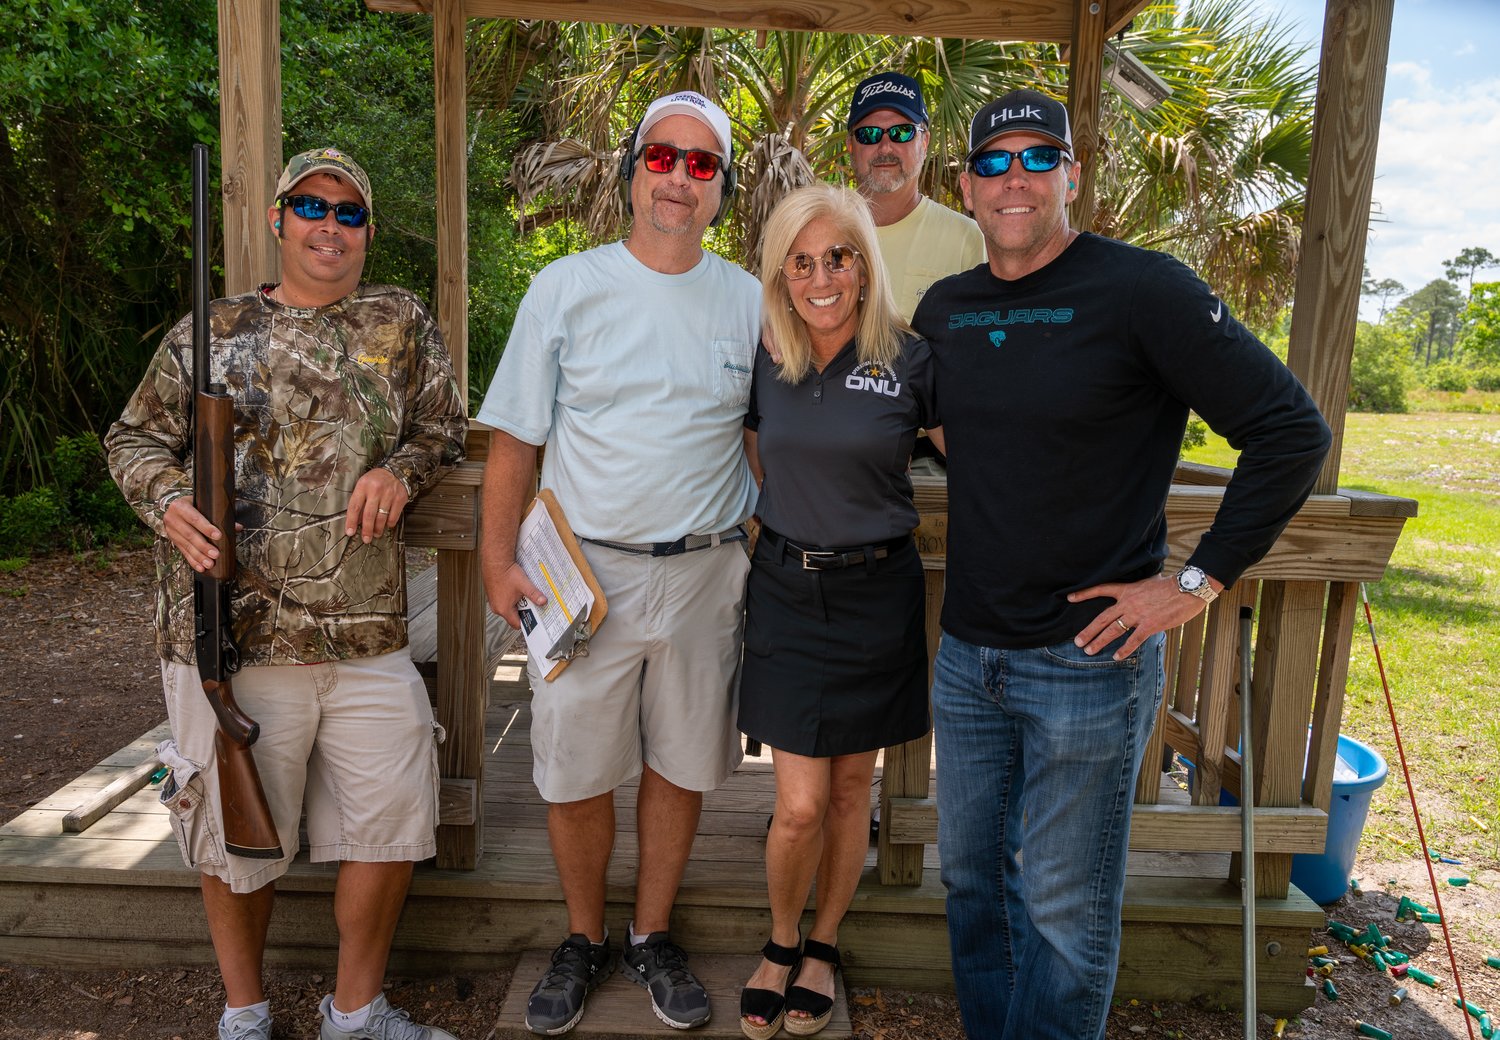 Pictured from left are Derek DiStefano, Jim Cotton, Operation New Uniform CEO and founder and Ponte Vedra resident Michele McManamon, Jim Houston and Chris Bedford.